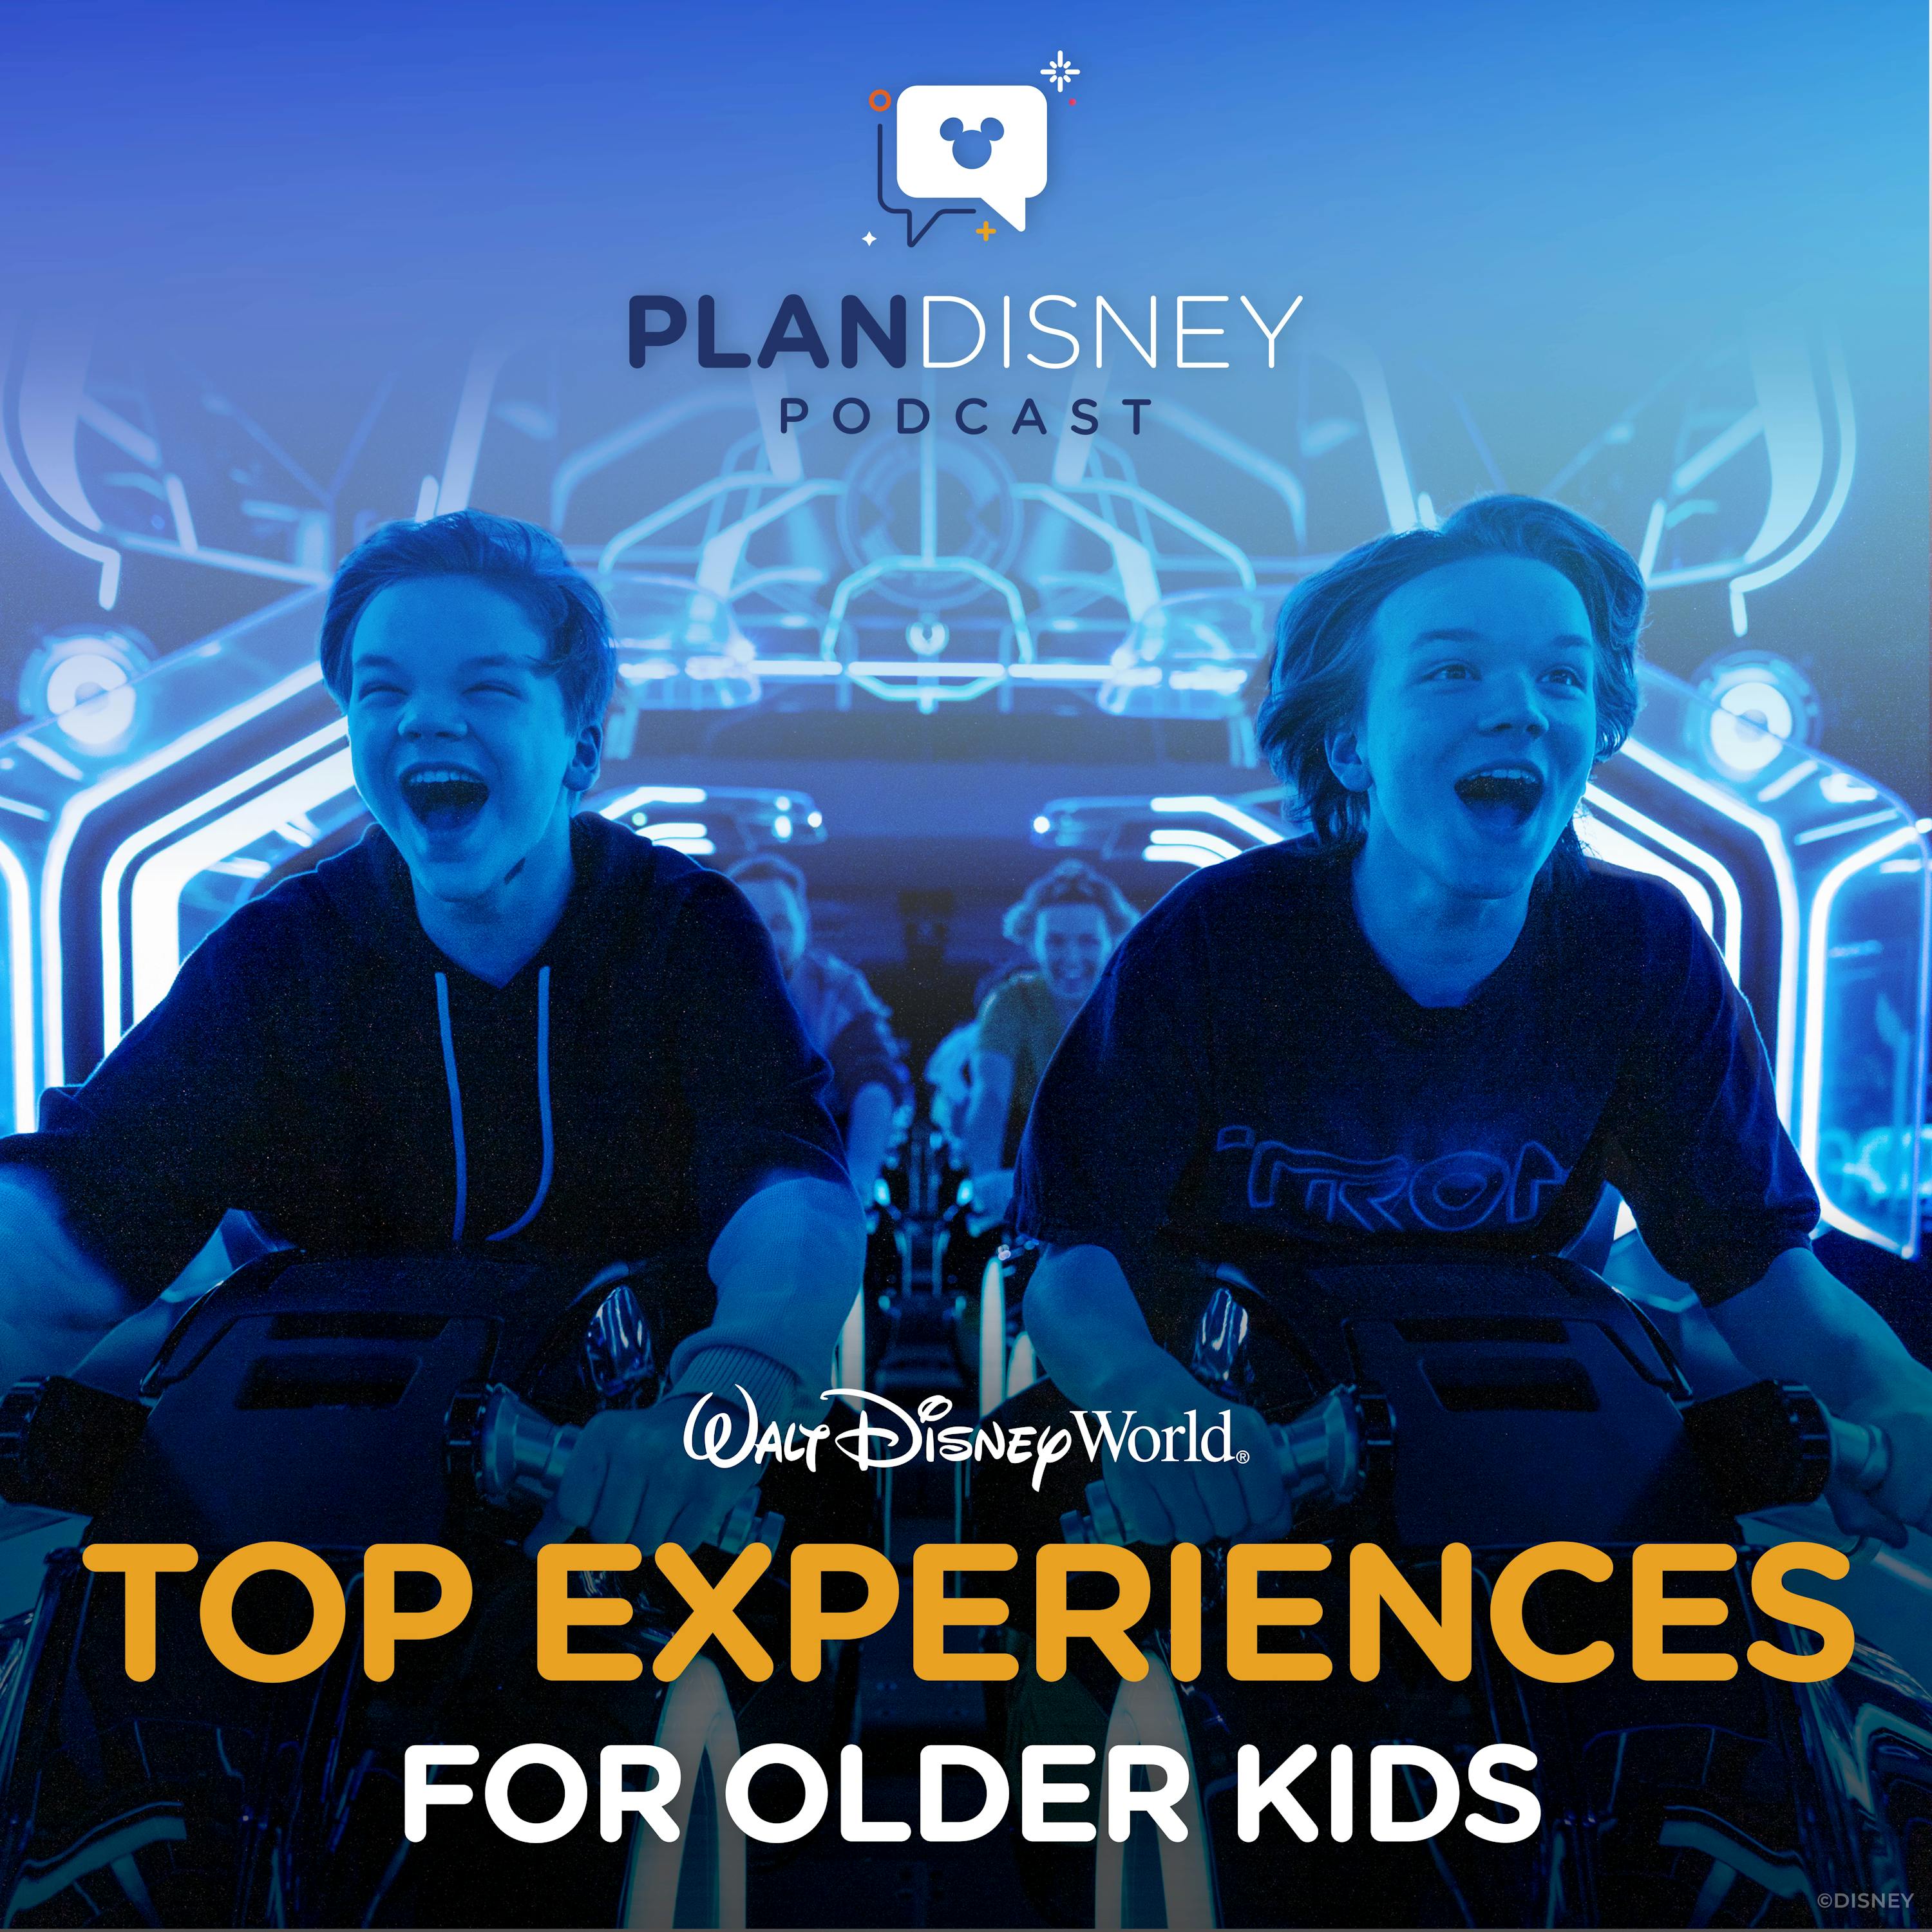 Top Experiences for Tweens and Teens